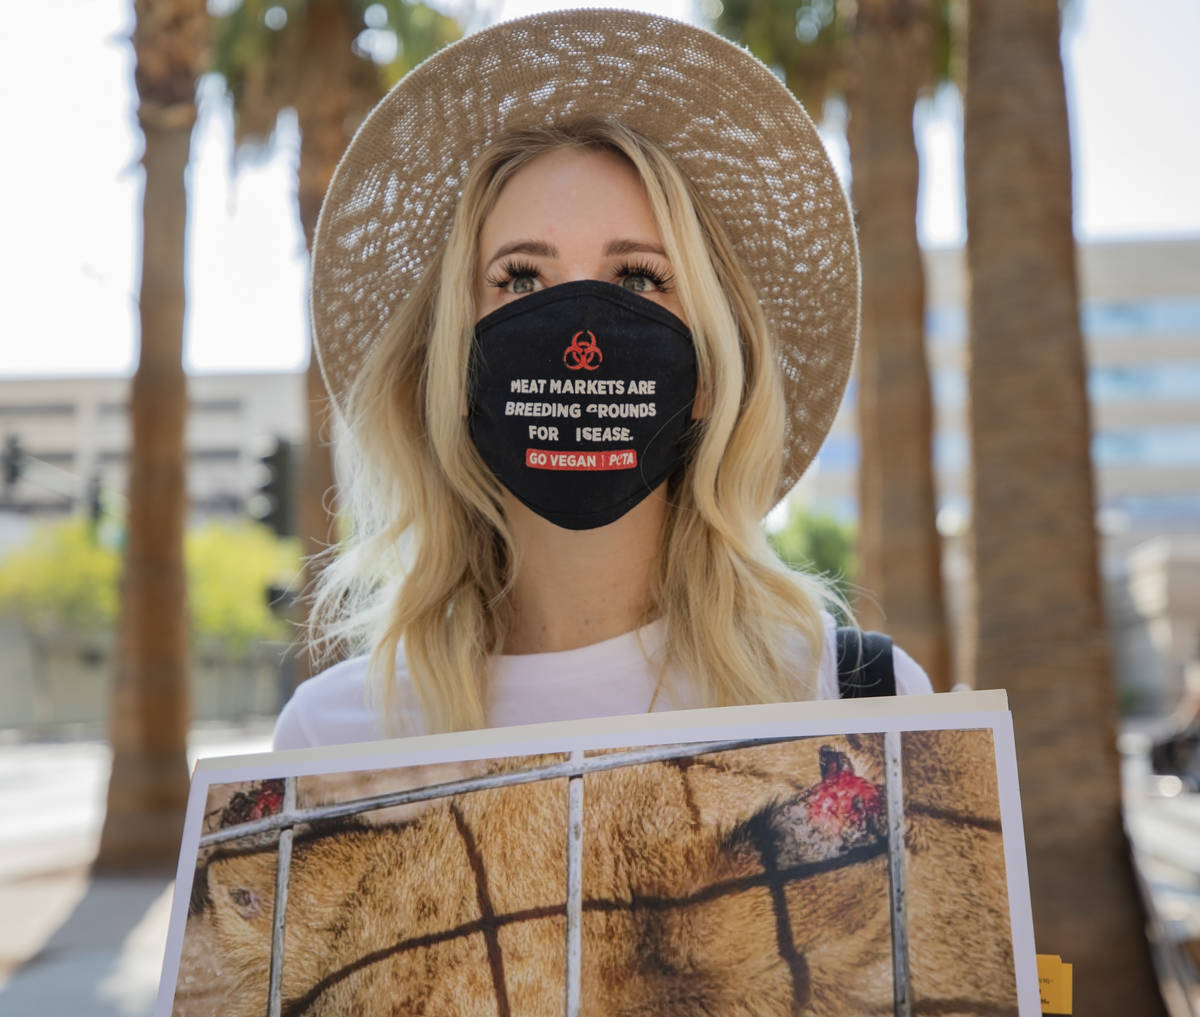 People for the Ethical Treatment of Animals activist Emily Slayter of Las Vegas protests animal ...